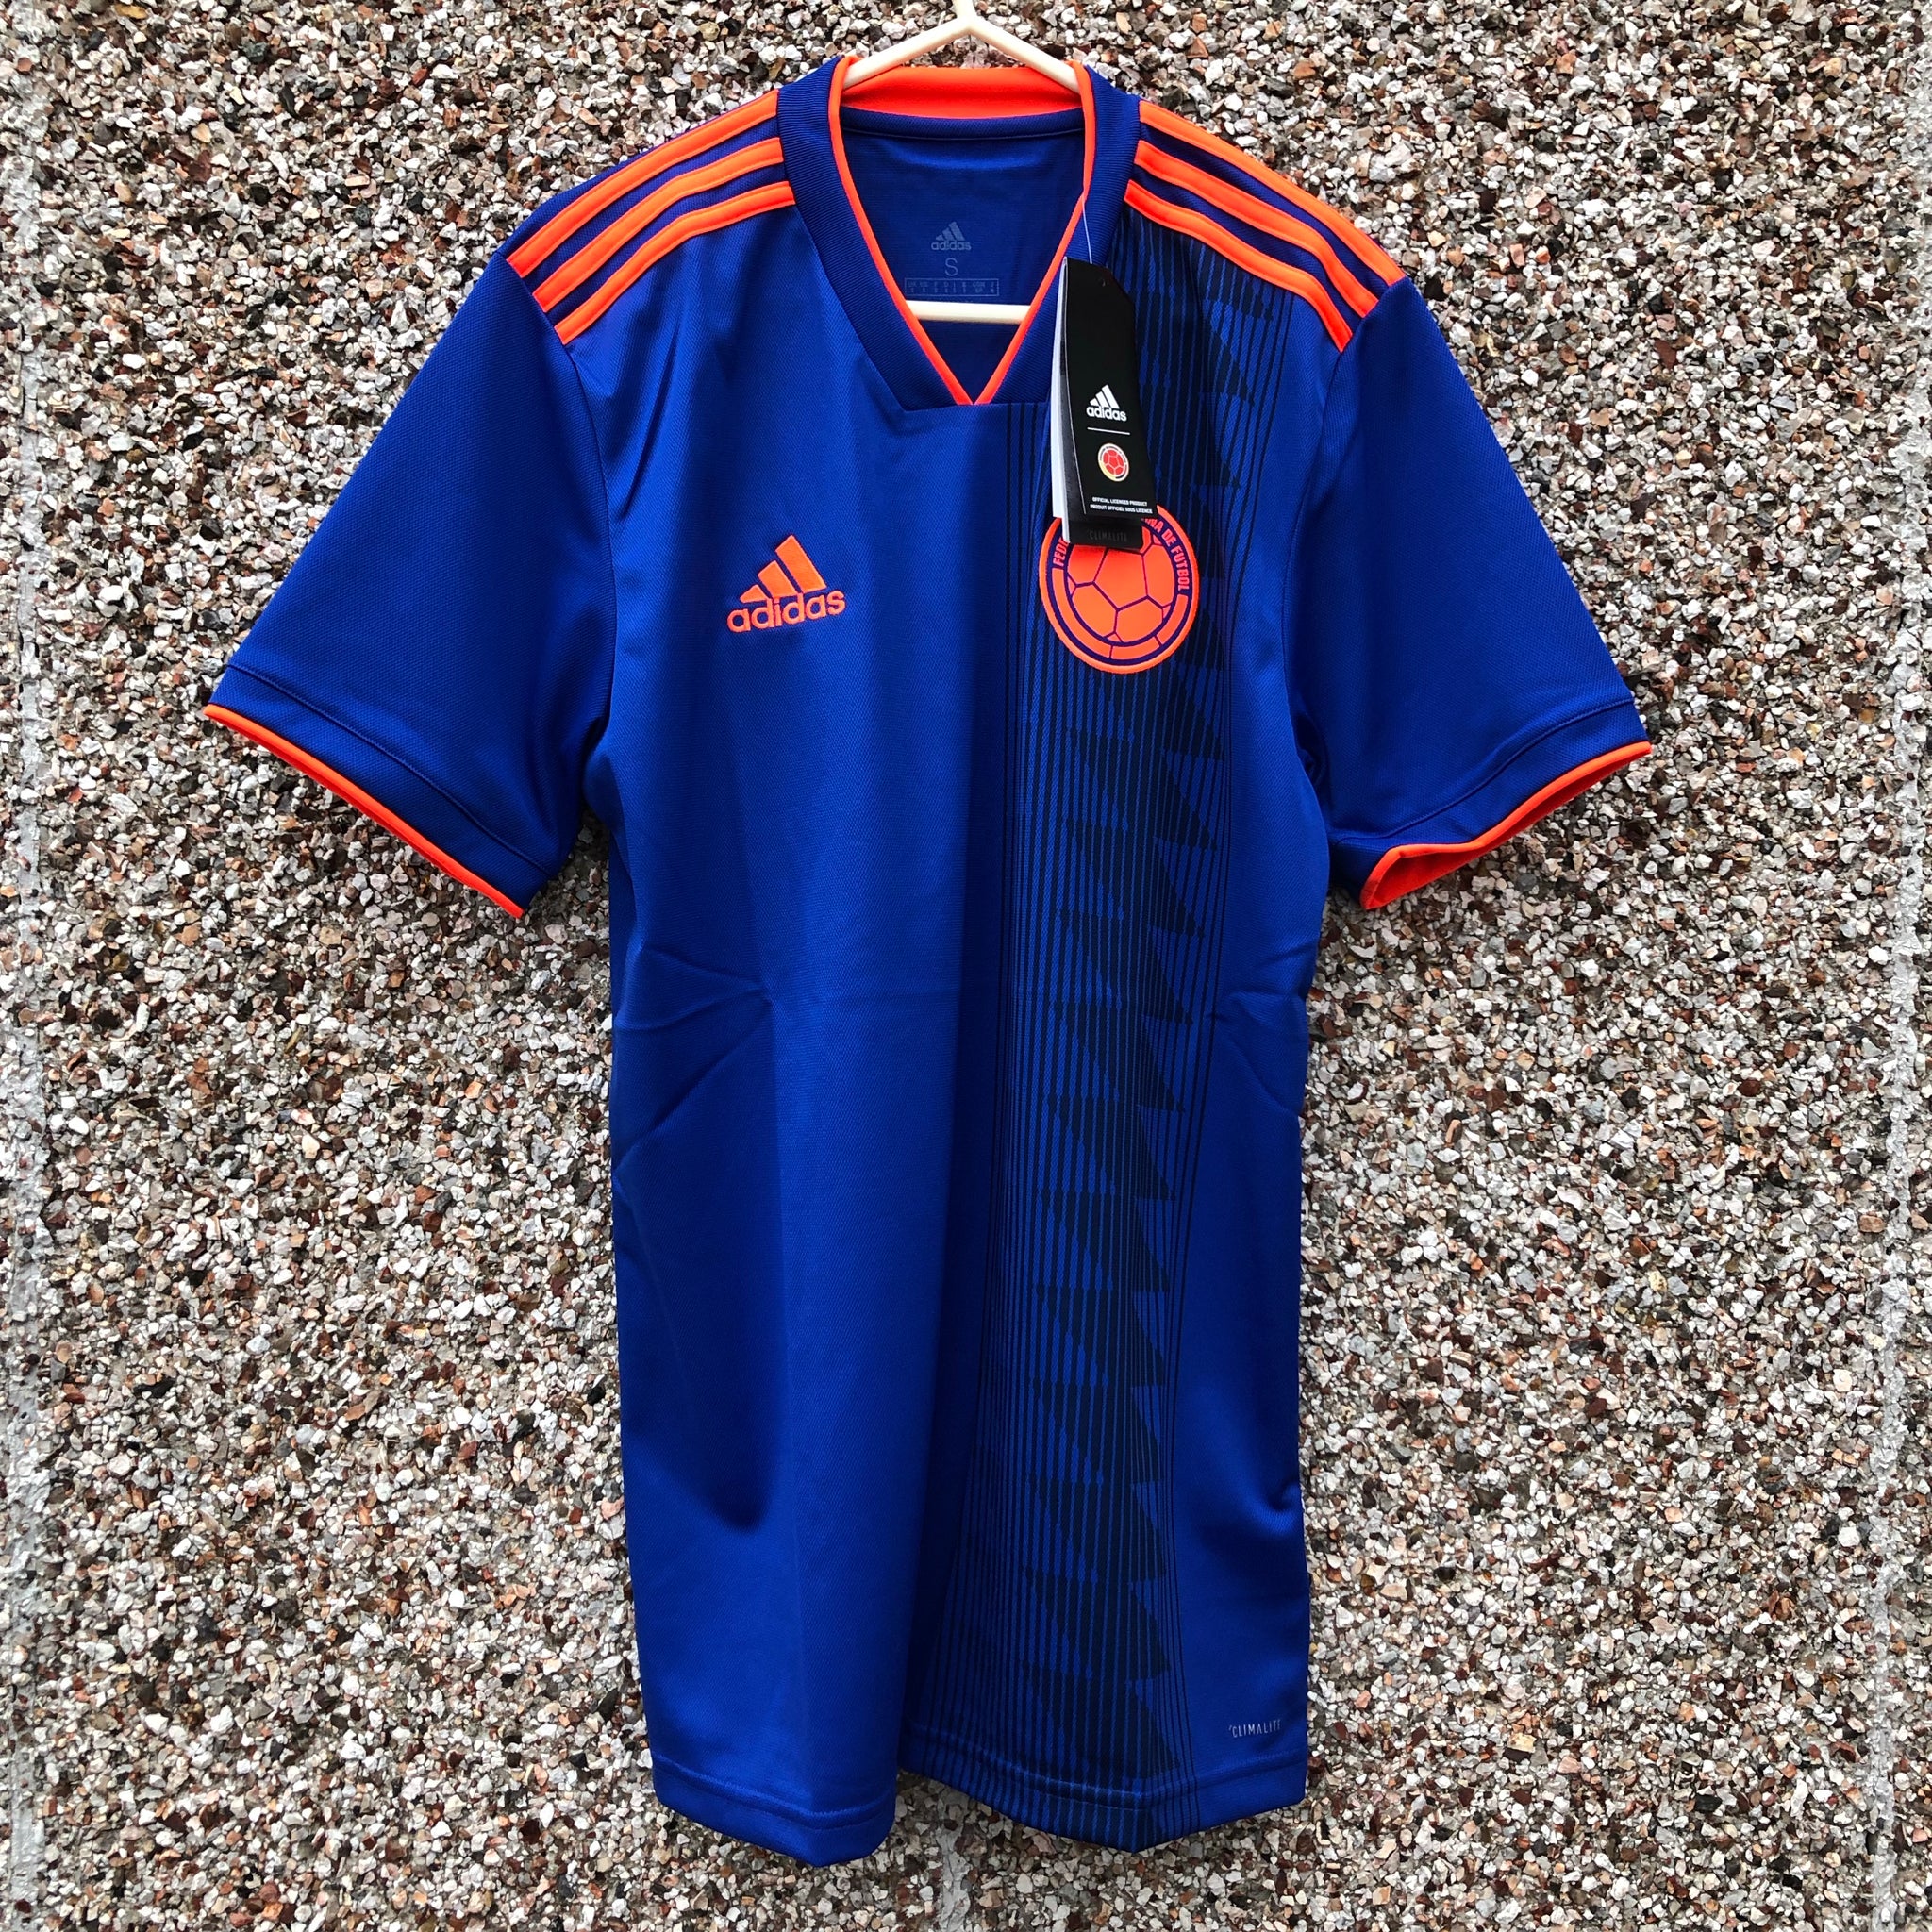 colombia football jersey 2019